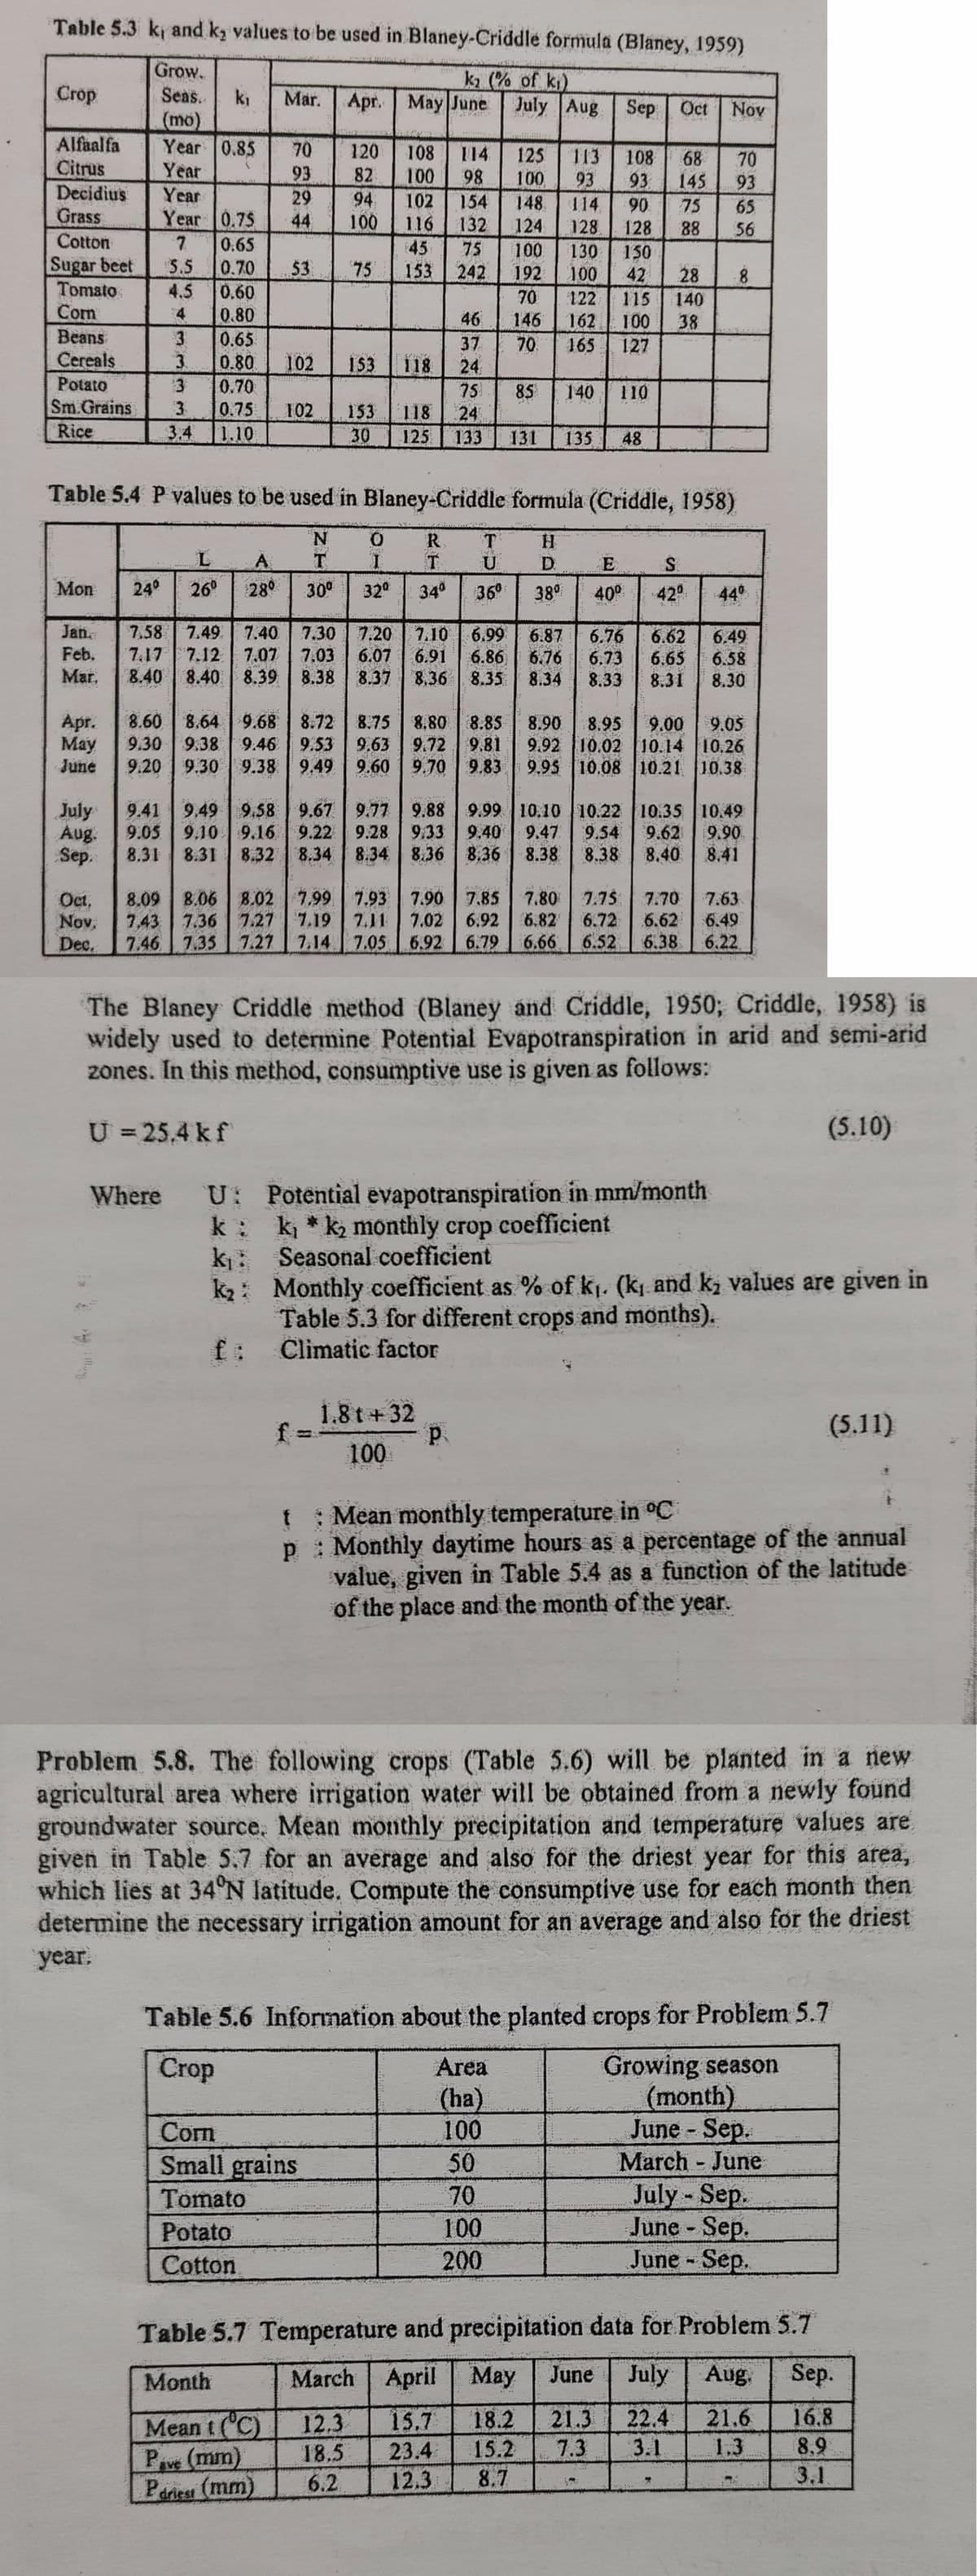 Table 5.3 k, and k₂ values to be used in Blaney-Criddle formula (Blaney, 1959)
Grow.
k₂ (% of k₁)
Crop
Seas.
k₁
Mar. Apr.
May June
July Aug Sep Oct Nov
(mo)
Alfaalfa
Year 0.85
Citrus
Year
Decidius
Year
Grass
Year 0.75
2227
70
120
108
114 125 113
108 68 70
93
82
100
98
100 93 93
145 93
29
94
102
154
148 114 90 75 65
44
100
116
132
124
128
128 88 56
Cotton
7
0.65
45
75
100 130
150
Sugar beet
5.5
0.70
53
75
153
242
192 100
42 28
888
Tomato
4.5
0.60
70 122 115 140
Com
4
0.80
46
146 162
100 38
Beans
3
0.65
37
70 165 127
Cereals
3
0.80
102
153
118
24
Potato
3
0.70
75
85
140 110
Sm.Grains 3
0.75
102
153
118
24
Rice
3.4 1.10
30
125
133 131 135 48
Table 5.4 P values to be used in Blaney-Criddle formula (Criddle, 1958)
N
R
T
H
L A
T
I
T
U
D
E
S
Mon
24°
26° 28°
30°
32°
34°
36°
38°
40°
42º
44°
Jan 7.58 7.49 7.40
Feb. 7.17 7.12 7.07
Mar, 8.40 8.40 8.39 8.38
7.30
7.20
7.10
6.99
6.87
6.76 6.62
6.49
7.03
6.07 6.91
6.86
6.76 6.73 6.65
6.58
8.37
8.36
8.35
8.34 8.33 8.31
8.30
Apr. 8.60 8.64 9.68 8.72 8.75
8.80
May 9.30 9.38 9.46 9.53 9.63 9.72
June 9.20 9.30 9.38 9.49
9.60
8.85
8.90 8.95 9.00 9.05
9.70
9.81 9.92 10.02 10.14 10.26
9.83 9.95 10.08 10.21 10.38
Sep.
July 9.41
9.49 9.58 9.67 9.77 9.88
9.99 10.10 10.22 10.35 10.49
Aug. 9.05 9.10 9.16 9.22 9.28 9.33 9.40 9.47 9.54 9.62 9.90
8.31 8.31 8.32 8.34 8.34 8.36 8.36 8.38 8.38 8.40 8.41
Oct.
8.09 8.06 8.02
Nov. 7,43 7.36 7.27
Dec. 7.46 7.35 7.27
7.99 7.93 7.90 7.85 7.80 7.75 7.70 7.63
7.19 7.11 7.02 6.92 6.82 6.72 6.62 6.49
7.14 7.05 6.92 6.79 6.66 6.52 6.38 6.22
The Blaney Criddle method (Blaney and Criddle, 1950; Criddle, 1958) is
widely used to determine Potential Evapotranspiration in arid and semi-arid
zones. In this method, consumptive use is given as follows:
U =25,4 kf
(5.10)
Where U:
Potential evapotranspiration in mm/month
k
k₁ *k2 monthly crop coefficient
k₁
Seasonal coefficient
k2: Monthly coefficient as % of k₁. (k₁ and k₂ values are given in
Table 5.3 for different crops and months).
f: Climatic factor
f=
1.8t 32
100
P
(5.11)
t: Mean monthly temperature in °C
p: Monthly daytime hours as a percentage of the annual
value, given in Table 5.4 as a function of the latitude
of the place and the month of the year.
Problem 5.8. The following crops (Table 5.6) will be planted in a new
agricultural area where irrigation water will be obtained from a newly found
groundwater source. Mean monthly precipitation and temperature values are
given in Table 5.7 for an average and also for the driest year for this area,
which lies at 34°N latitude. Compute the consumptive use for each month then
determine the necessary irrigation amount for an average and also for the driest
year.
Table 5.6 Information about the planted crops for Problem 5.7
Growing season
(month)
Crop
Area
(ha)
Corn
100
June - Sep.
Small grains
50
March - June
Tomato
70
July - Sep.
Potato
100
June-Sep.
Cotton
200
June - Sep.
Table 5.7 Temperature and precipitation data for Problem 5.7
Month
June
March April May
Meant (°C)
Pave (mm)
Pariest (mm)
July Aug. Sep.
12.3 15.7 18.2 21.3 22.4 21.6 16.8
18.5 23.4 15.2 7.3 3.1. 1.3
8.9
12.3
6.2
8.7
3.1.